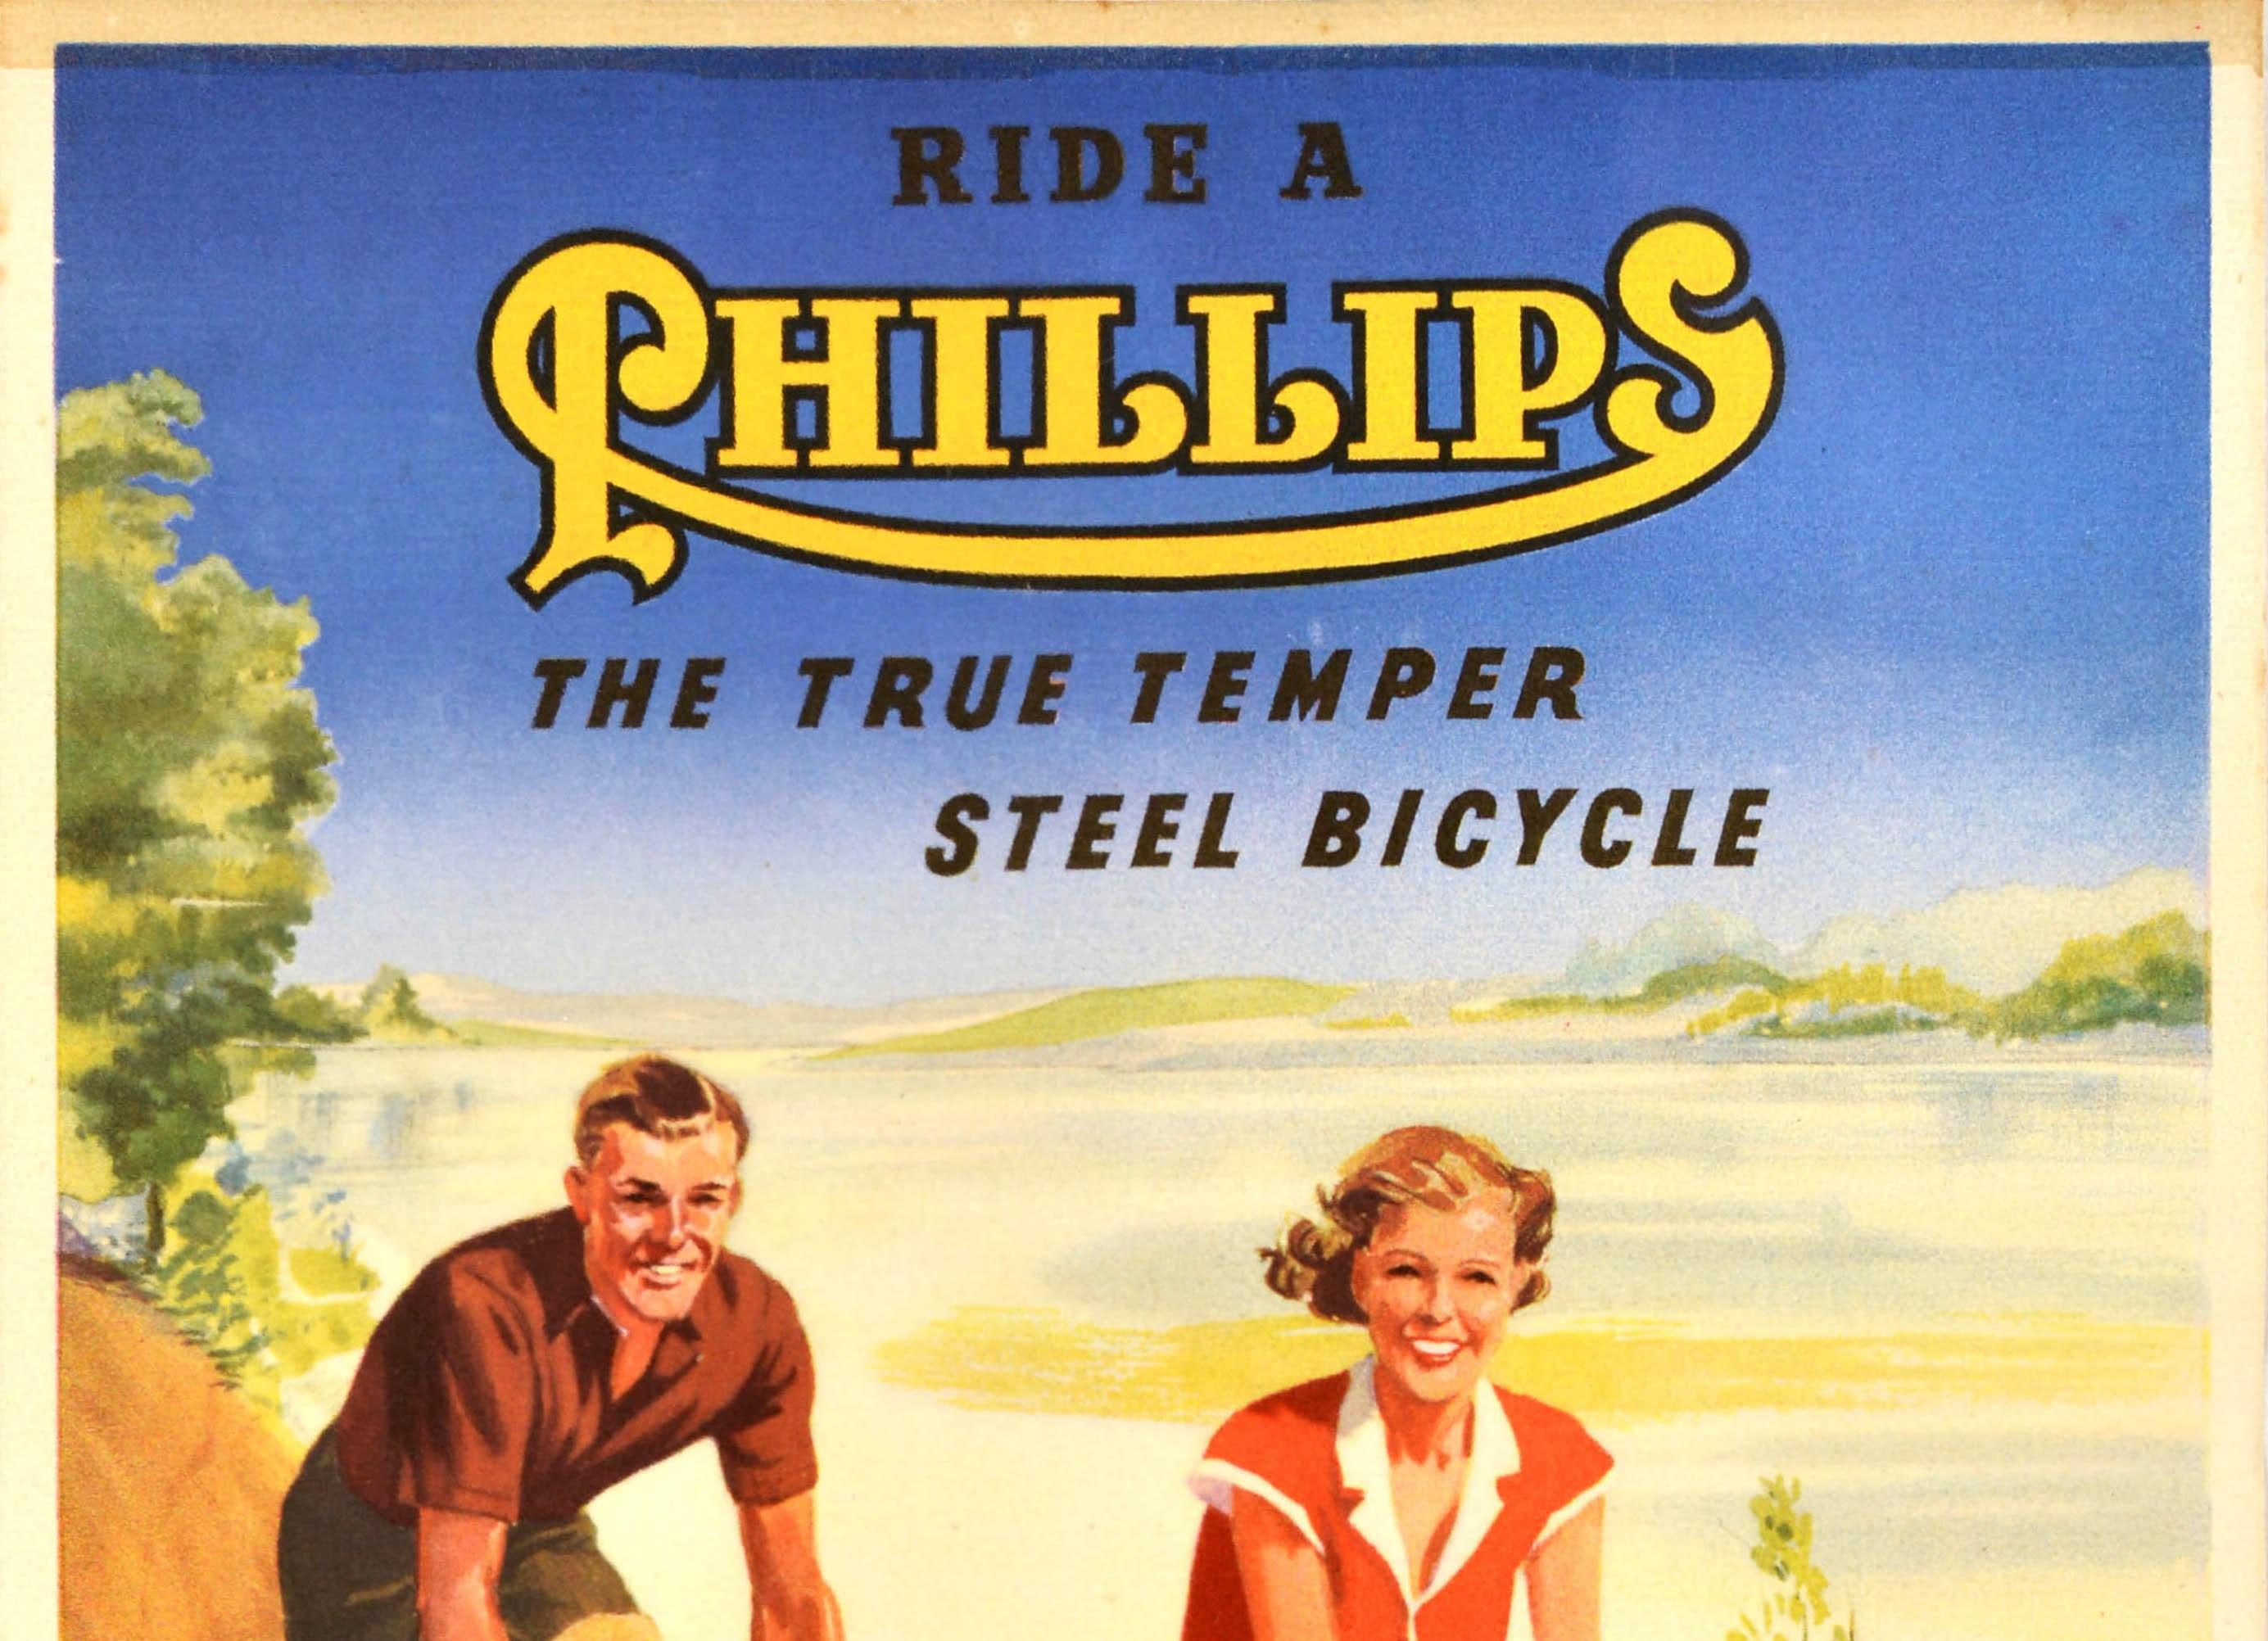 Original Vintage Bike Poster Ride A Phillips Steel Bicycle Countryside Cyclists - Print by Unknown